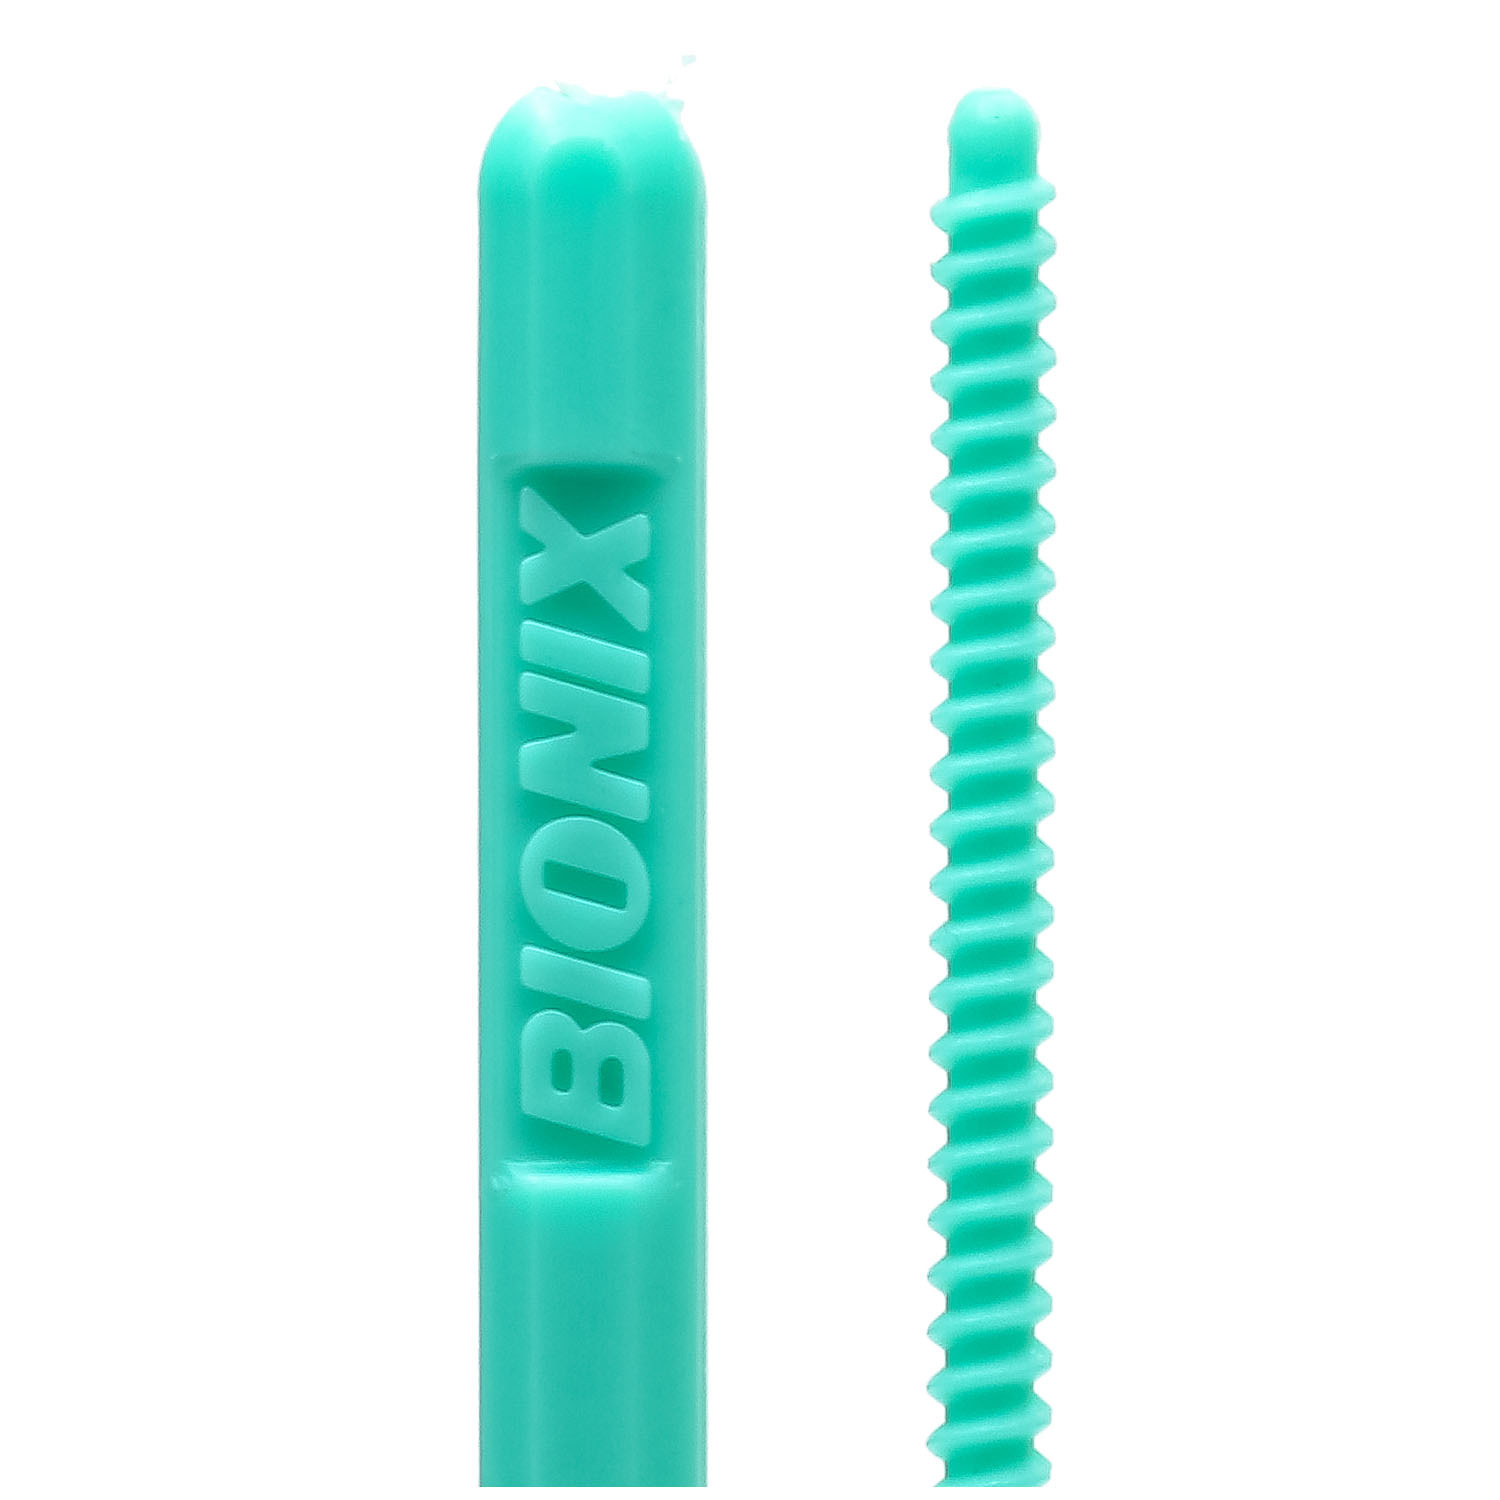 BIONIX DECLOGGER FOR ENTERAL FEEDING TUBES : 913 BX $90.81 Stocked